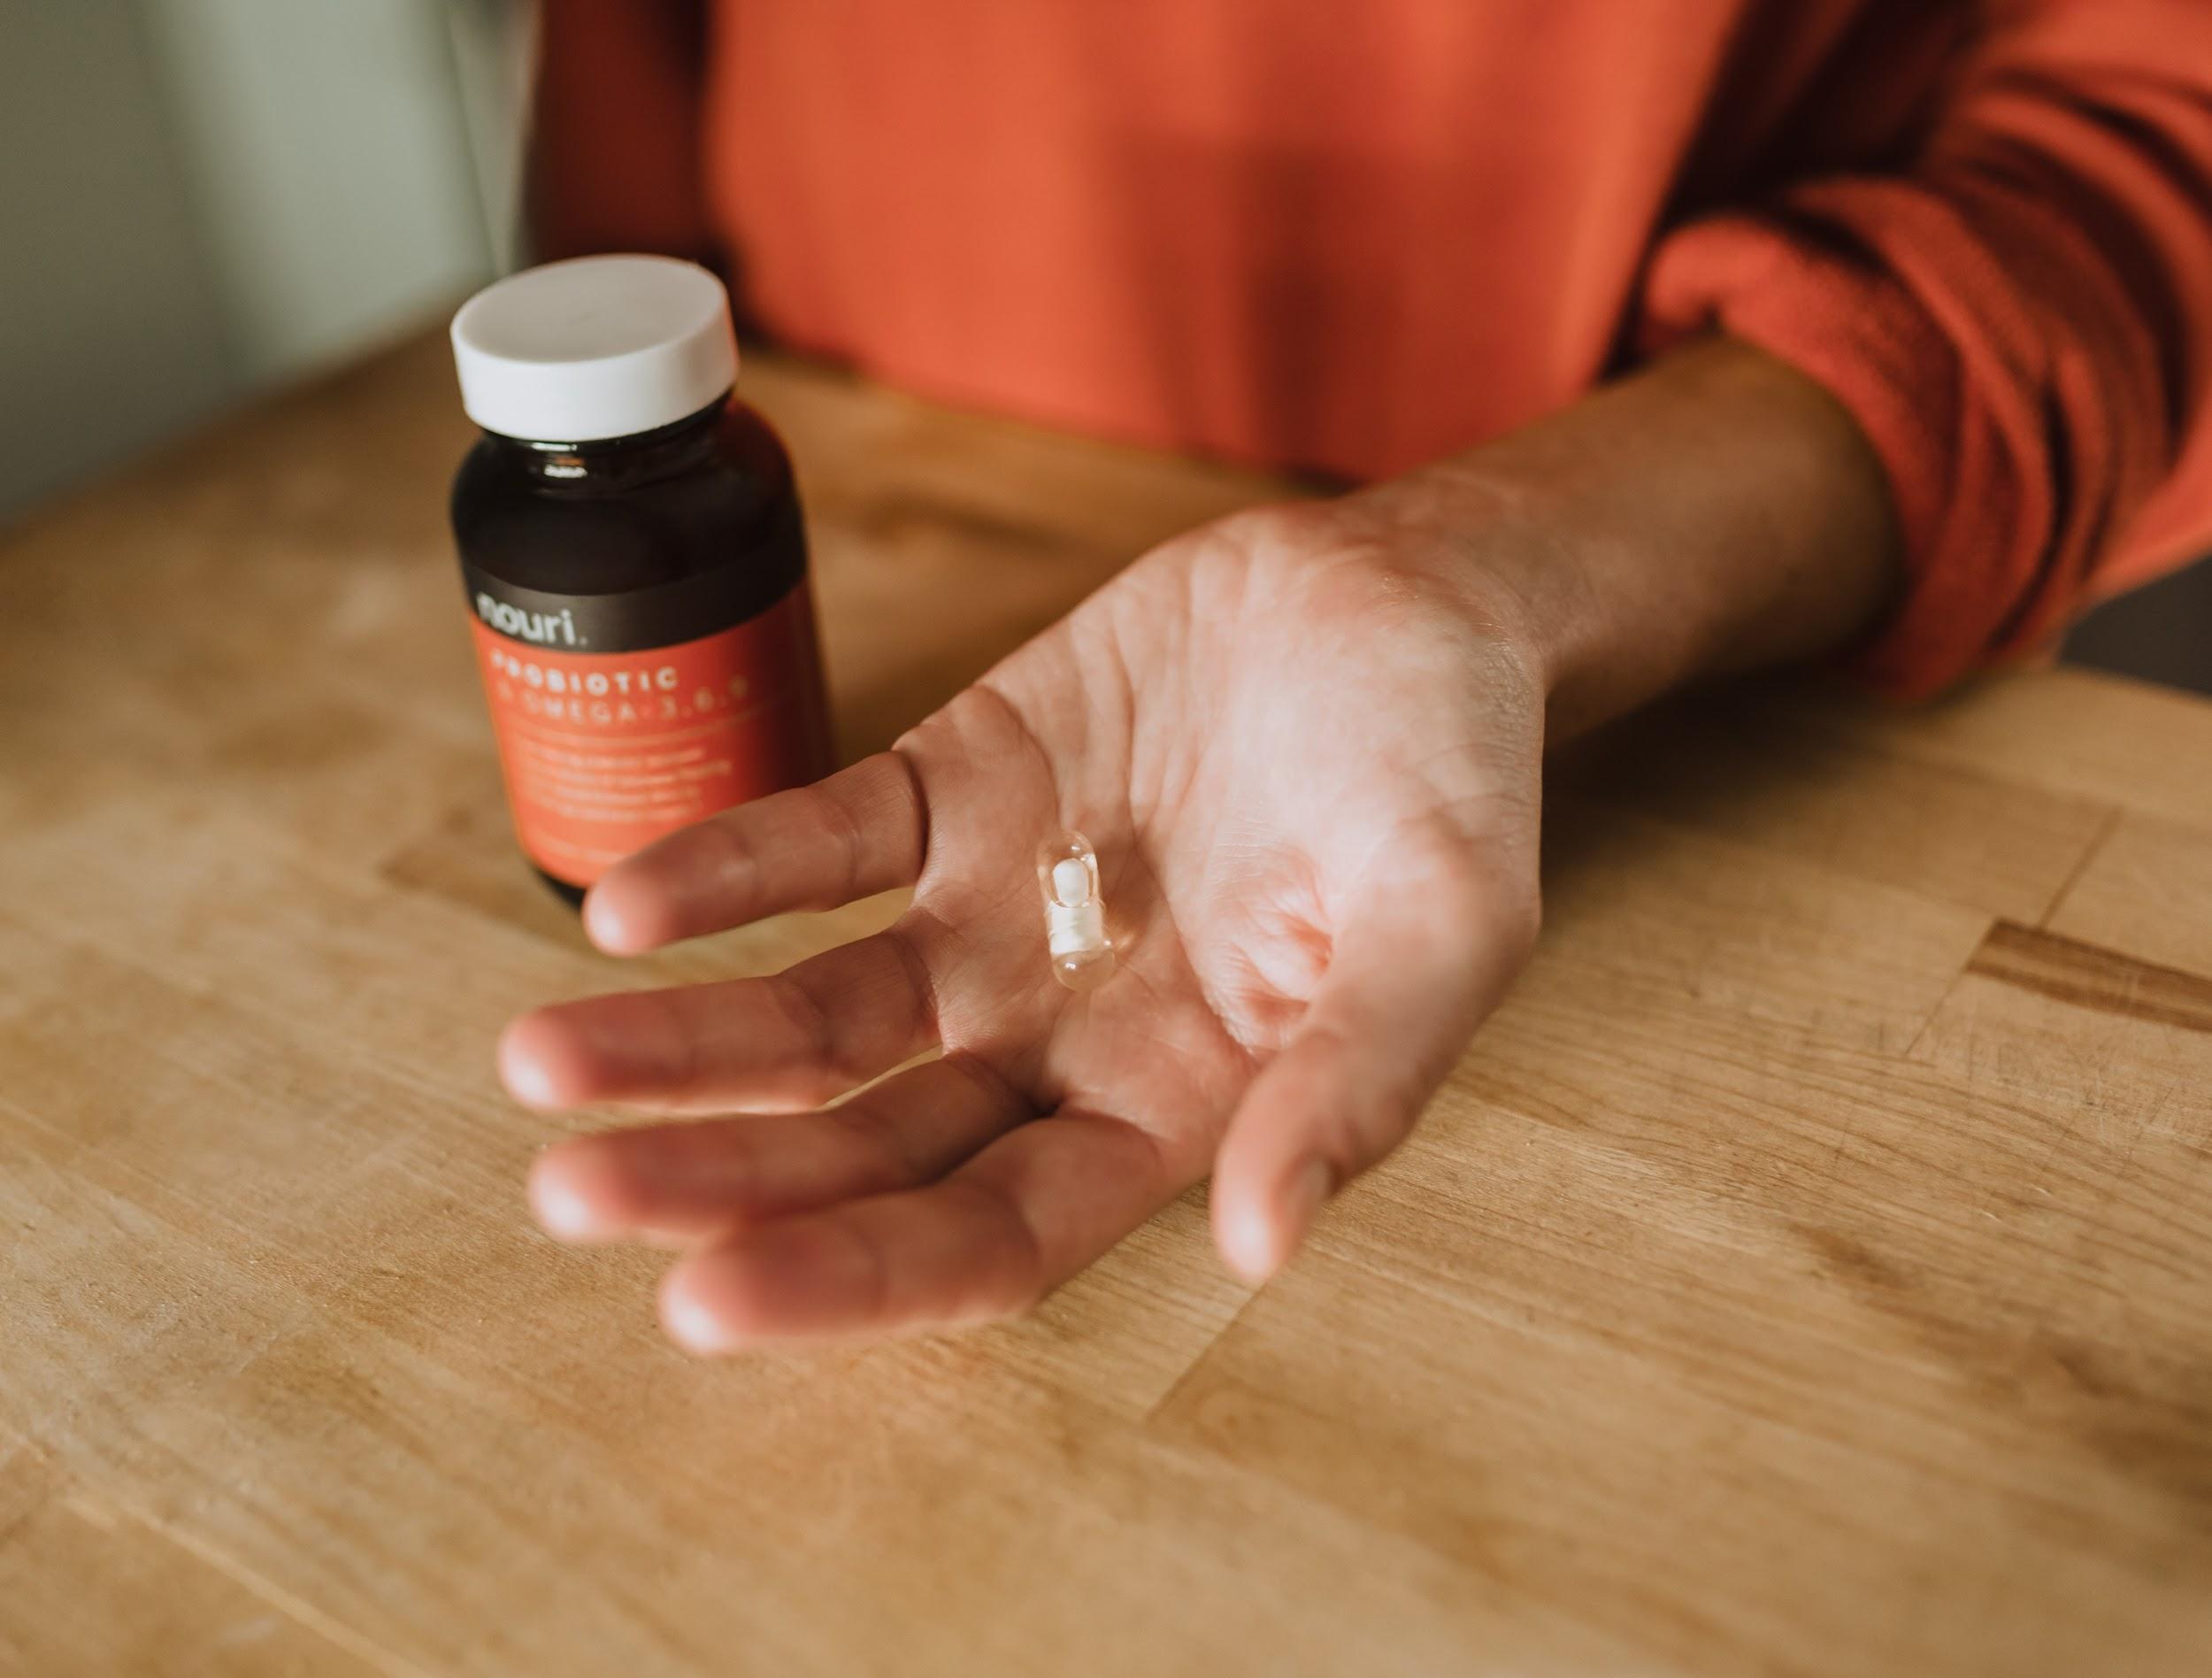 Woman holding probiotic capsule in her hand next to brand bottle over wooden counter.